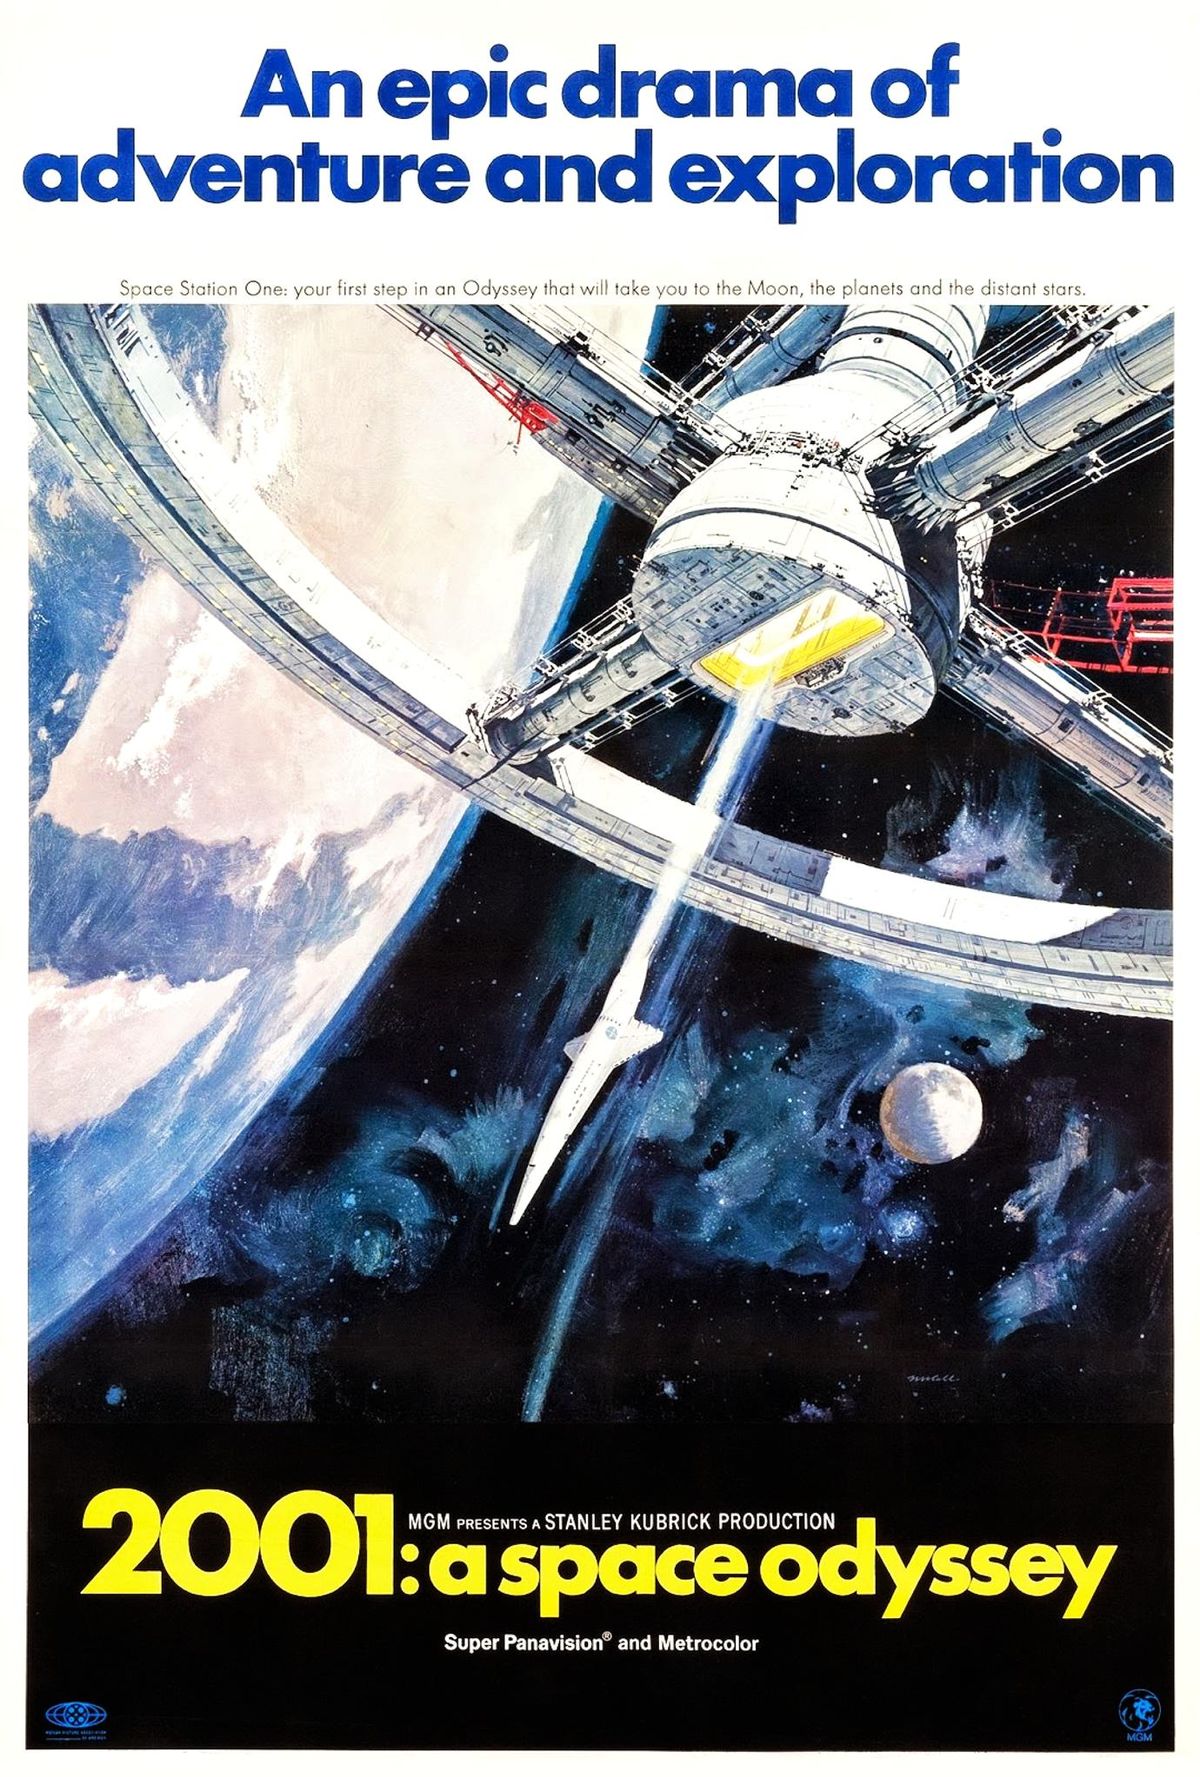 2001: A SPACE ODYSSEY (1968 FILM) PRESENTED BY: LSU MUSEUM OF ART 